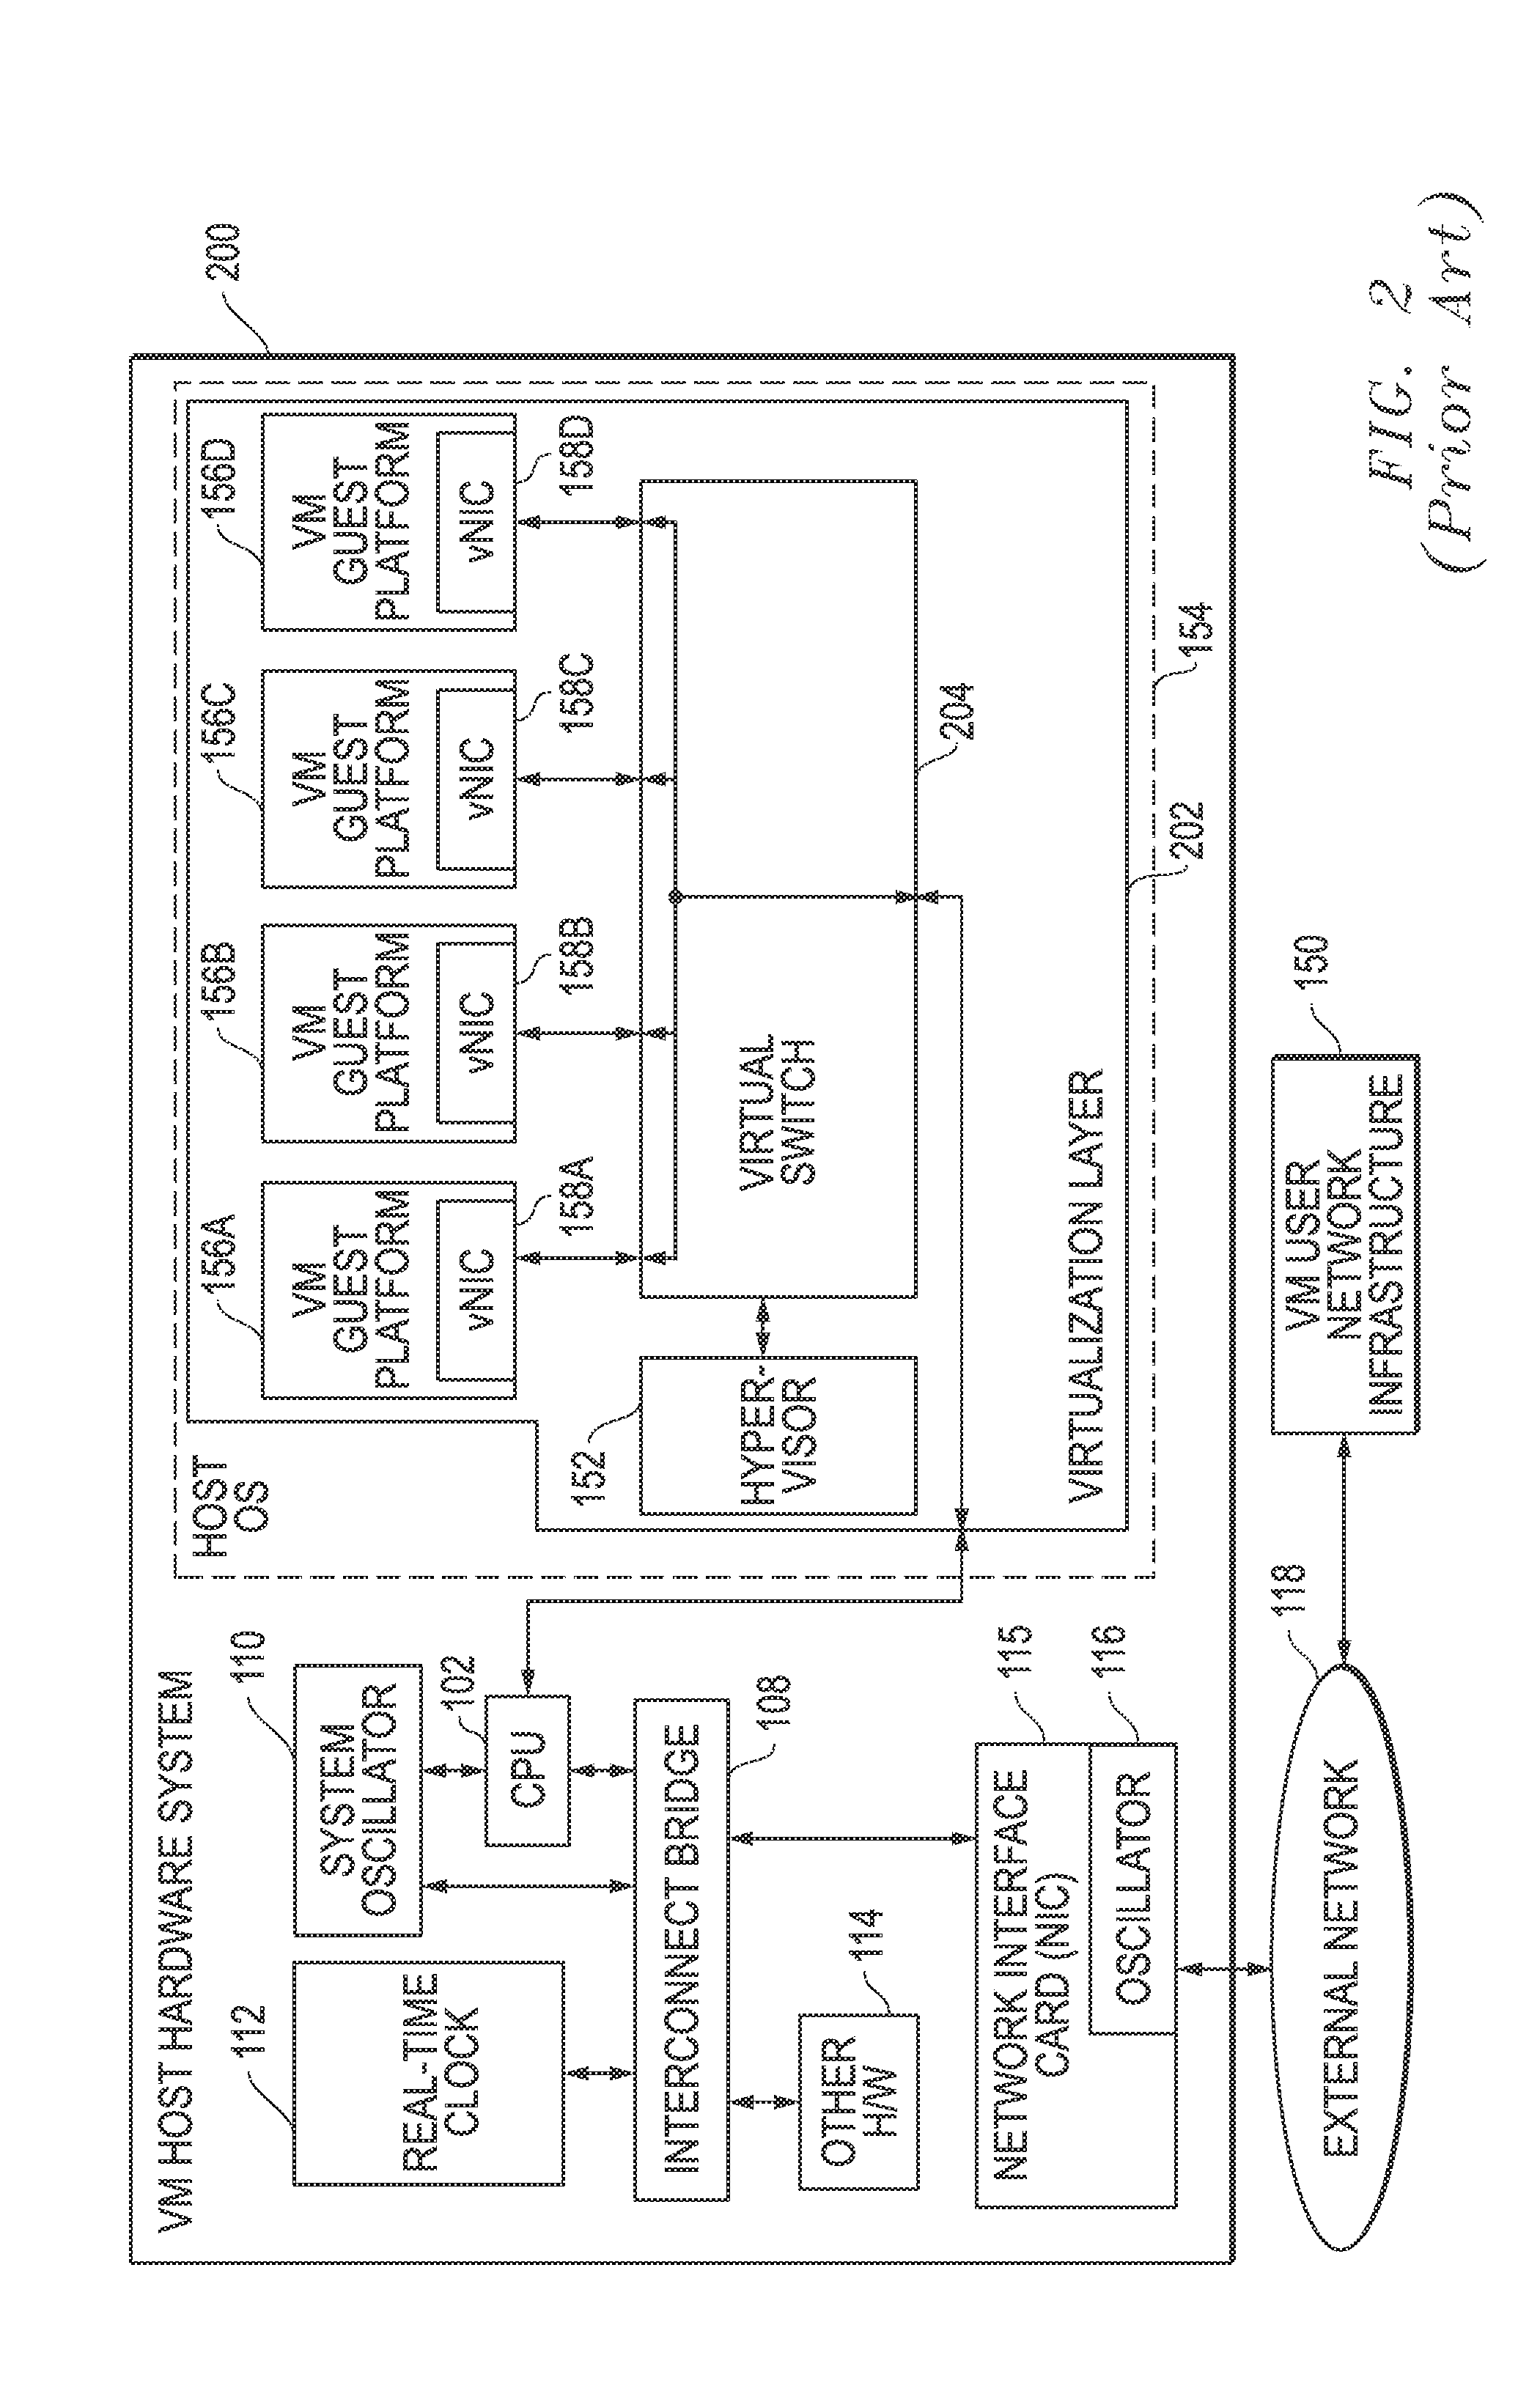 Methods And Systems For Forwarding Network Packets Within Virtual Machine Host Systems